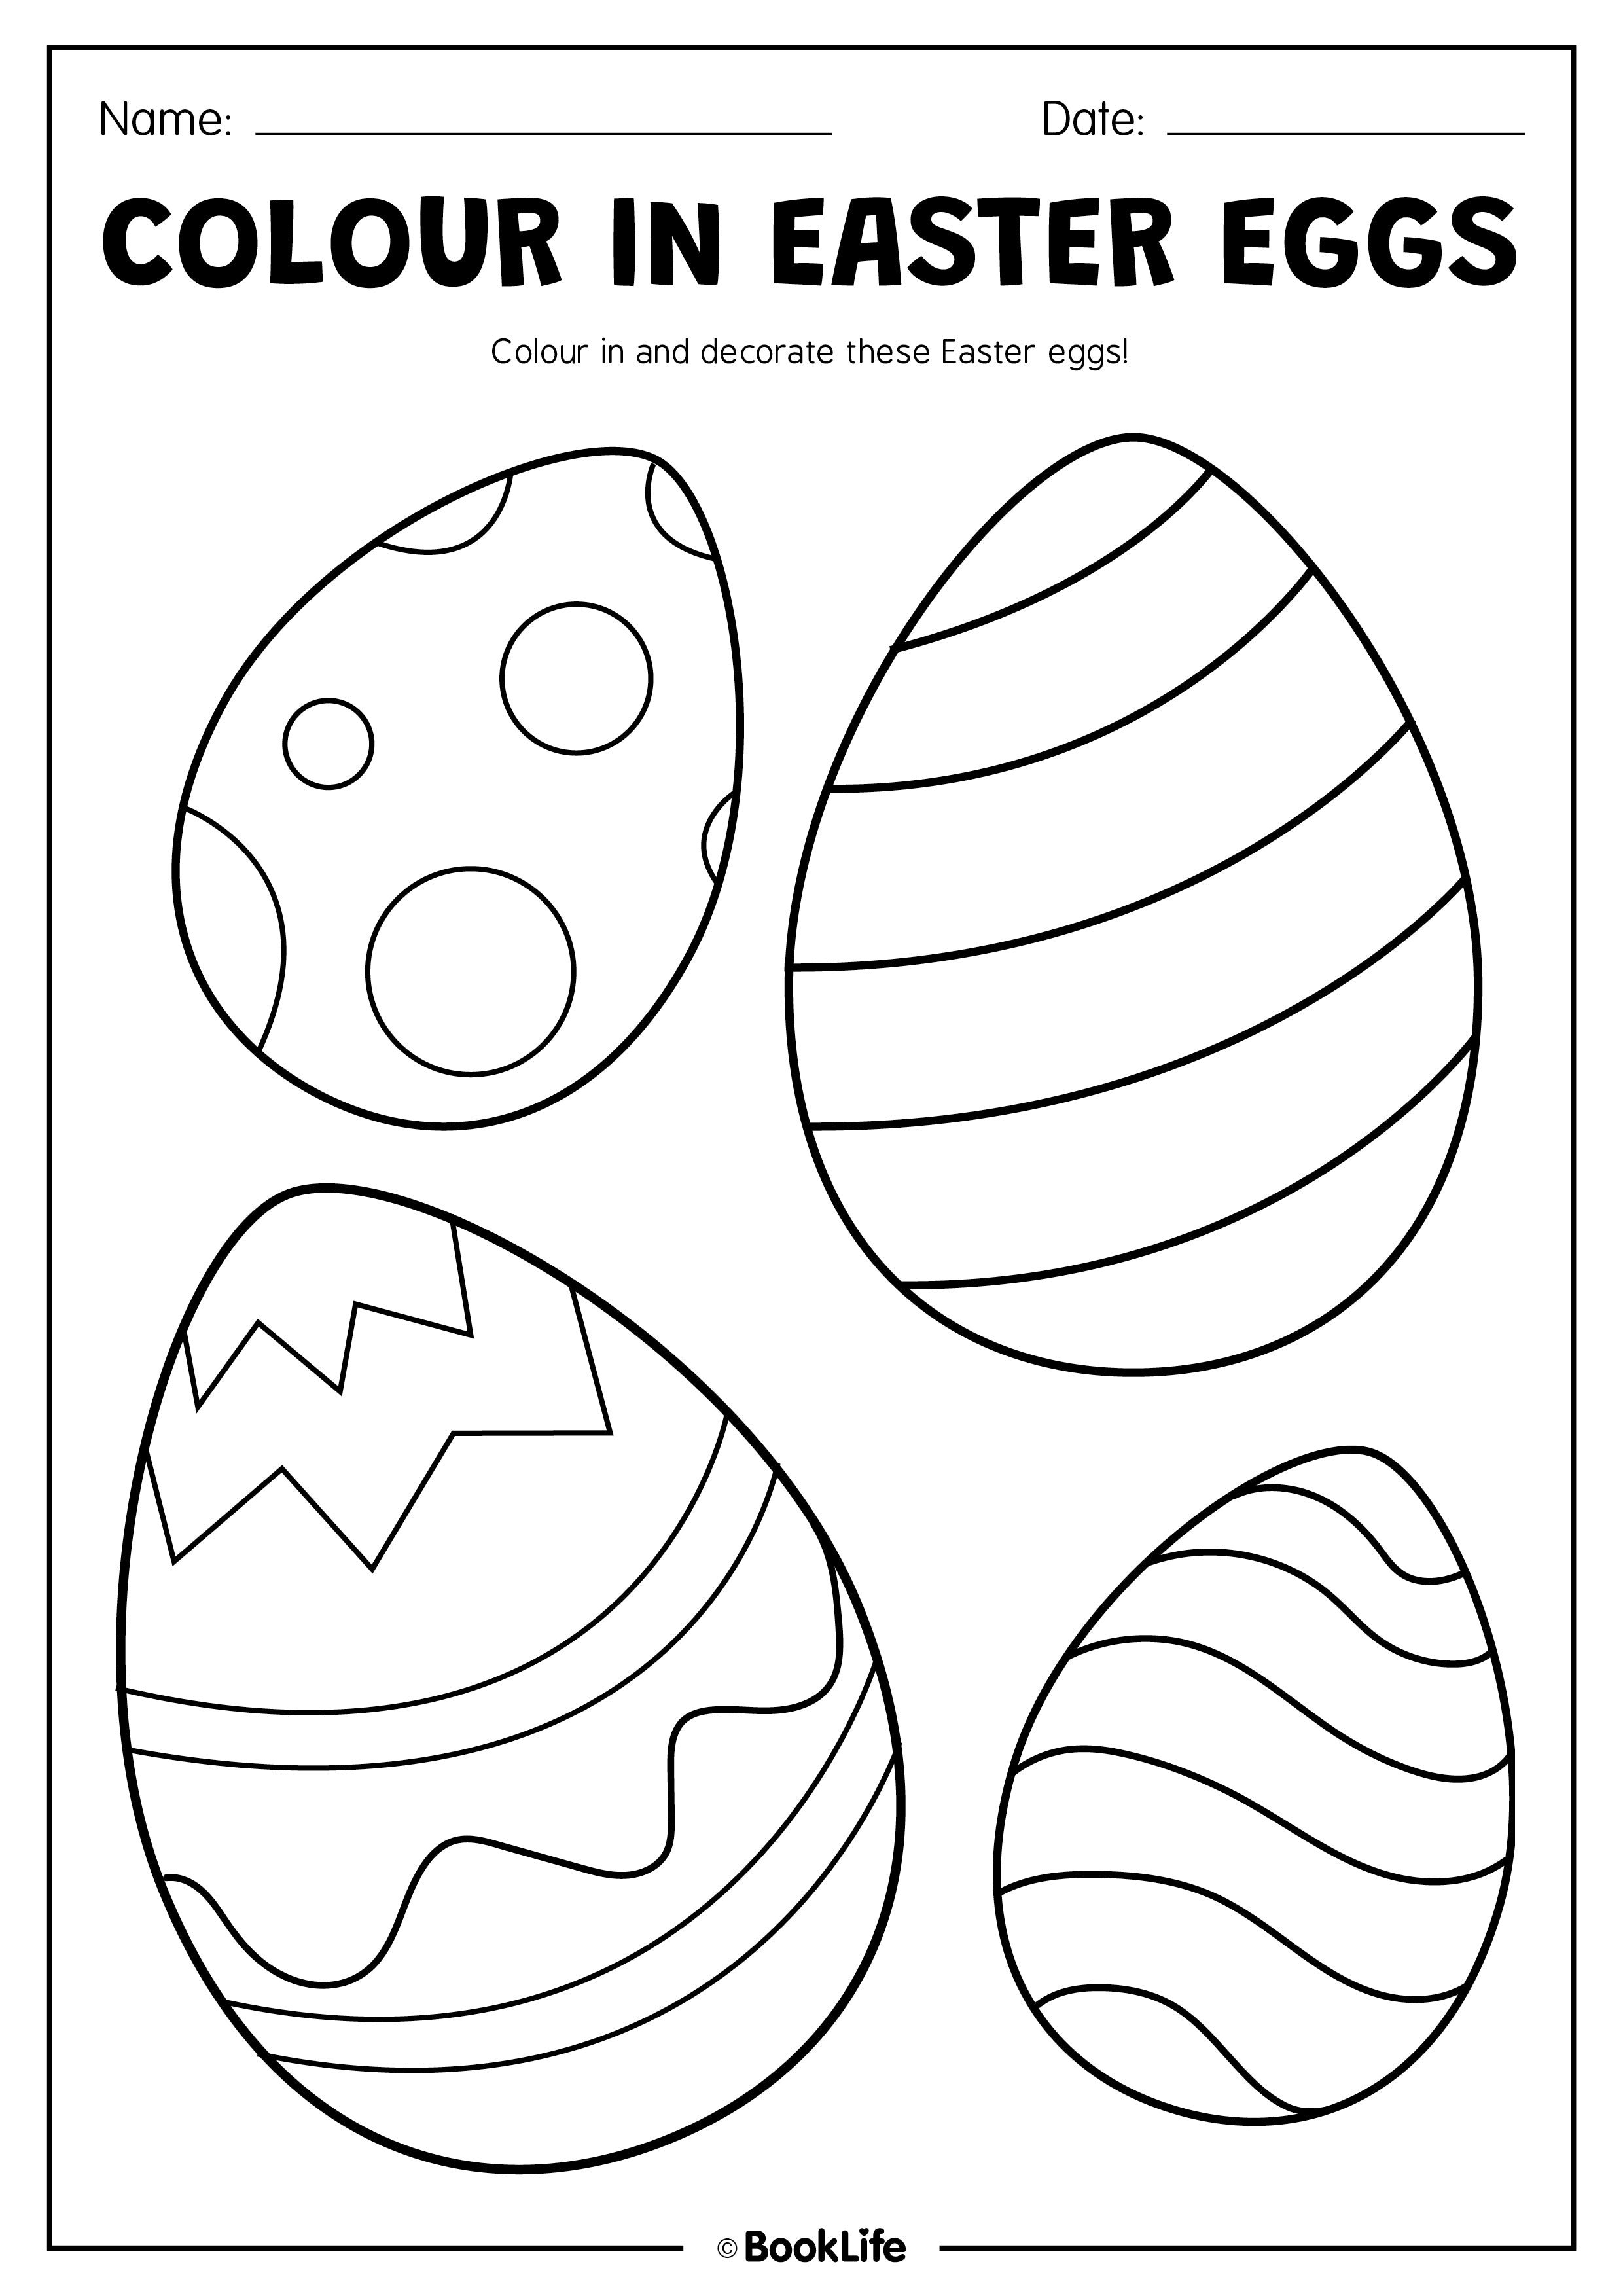 Colour in Easter Eggs